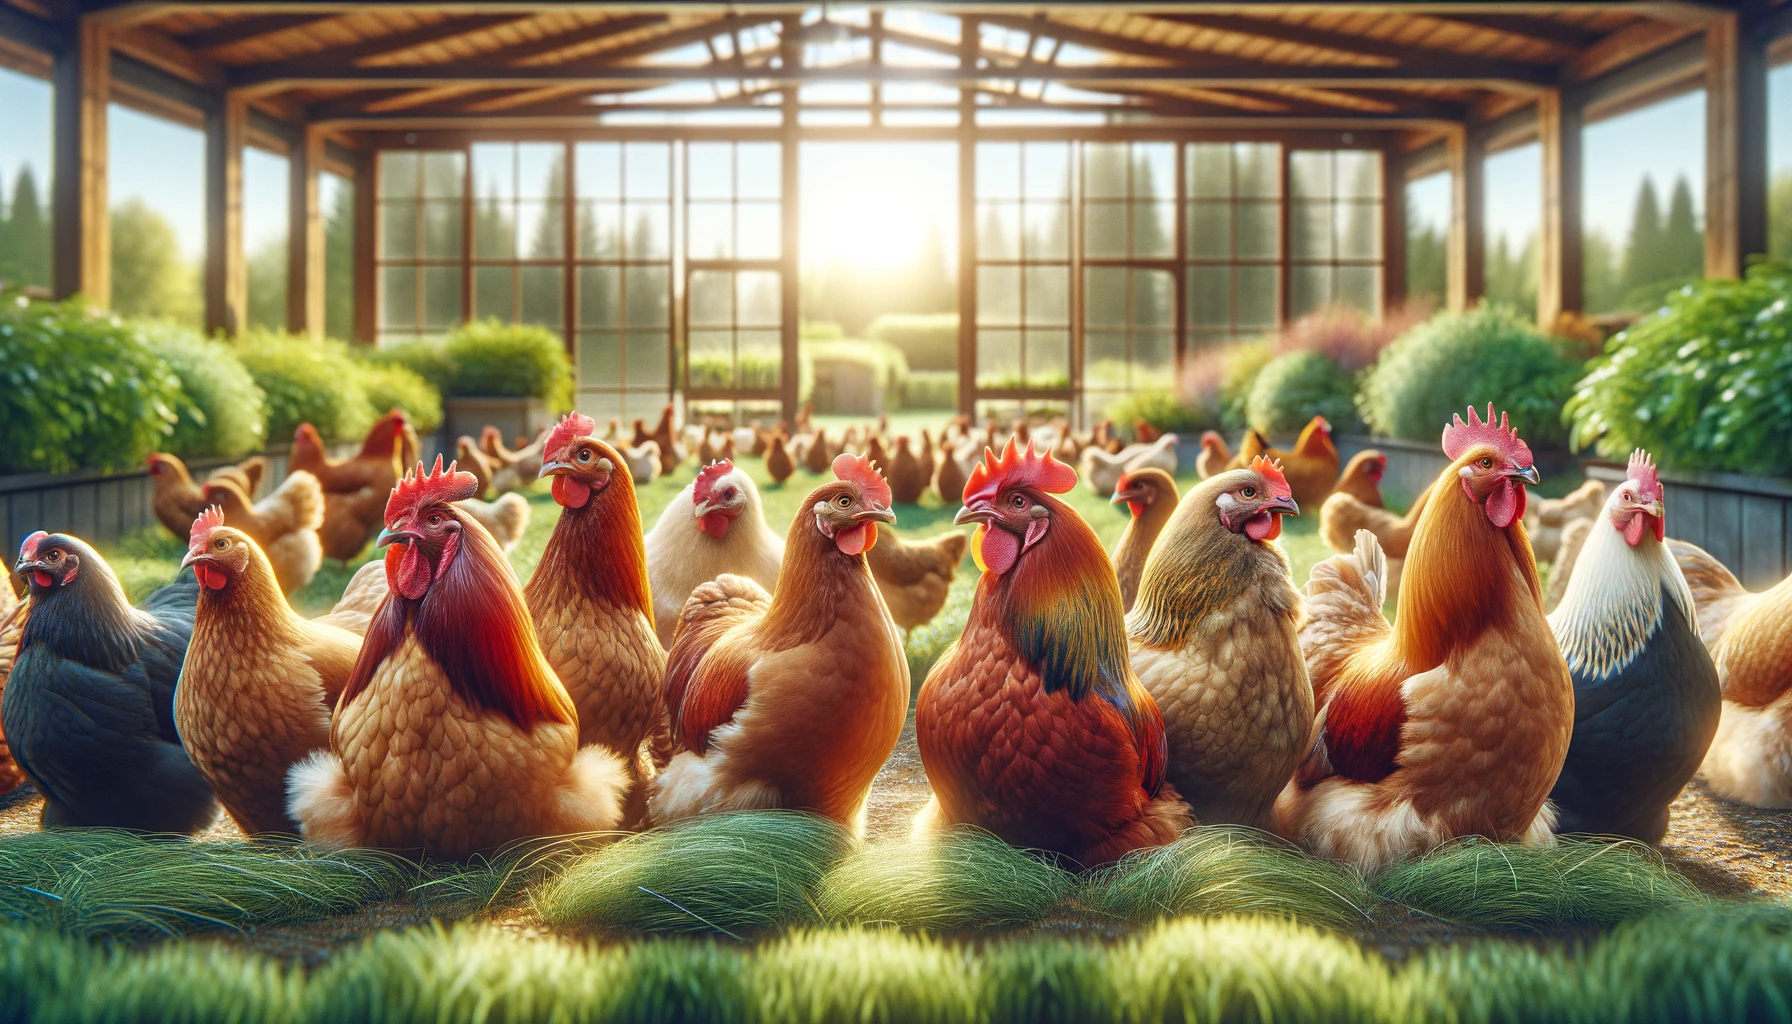  diverse chicken breeds in a spacious outdoor setting